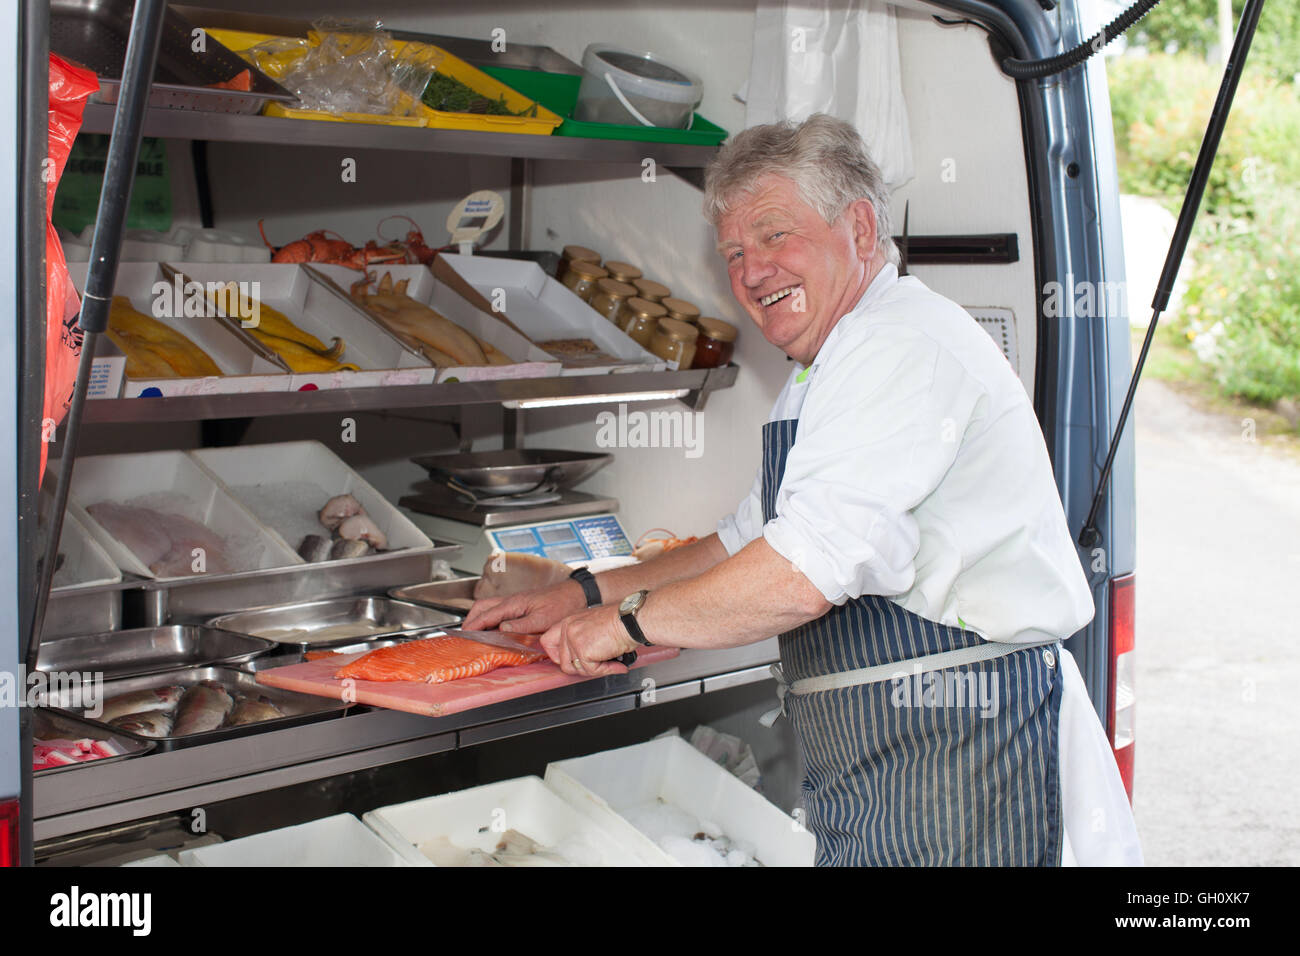 Friendly smiling man serving fresh fish from a mobile van.  A sole trader small business in Wales. Stock Photo